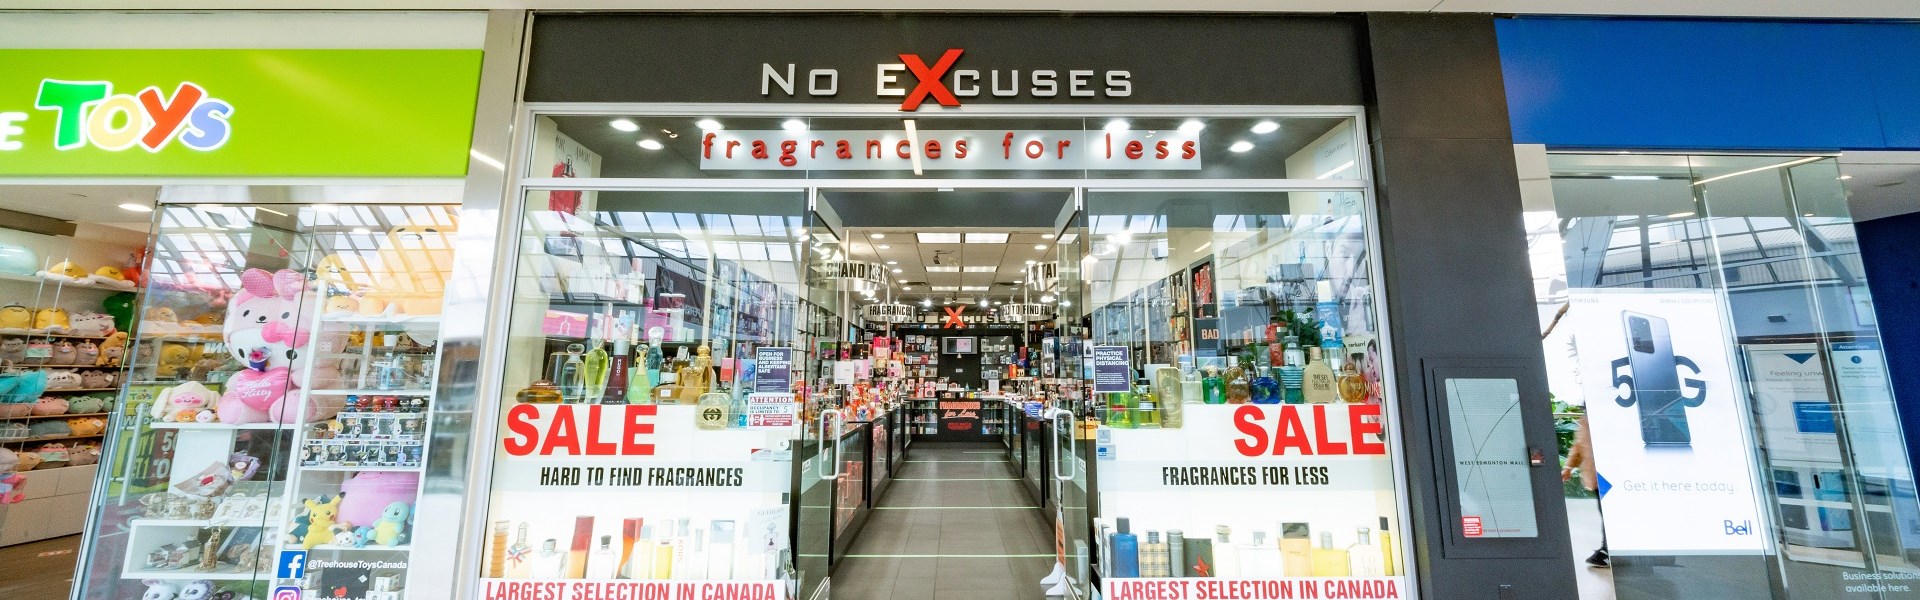 No Excuses - Fragrances for Less